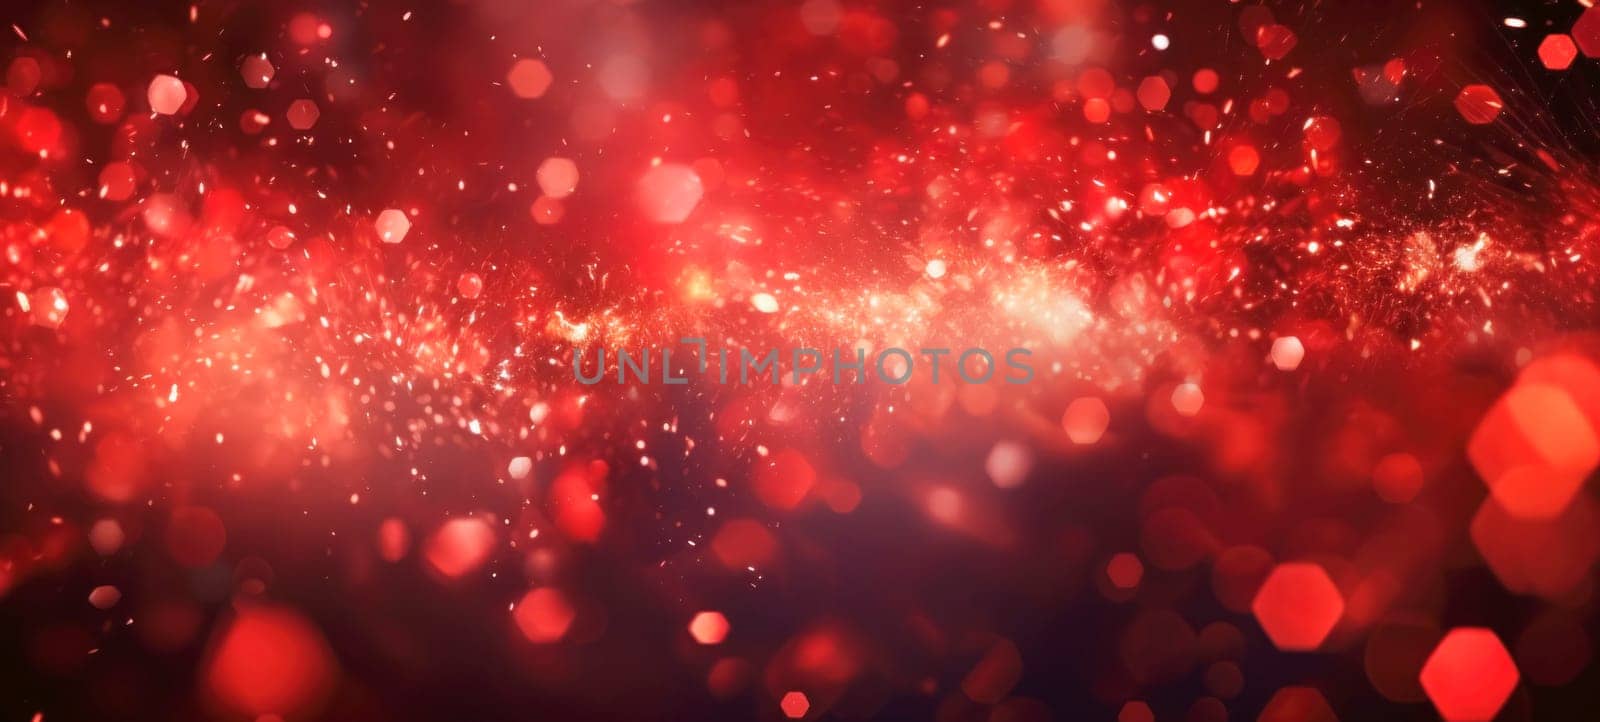 Abstract background with red fireworks, sparkles, shiny bokeh glitter lights. Festive background for card, flyer, invitation, placard, voucher, banner